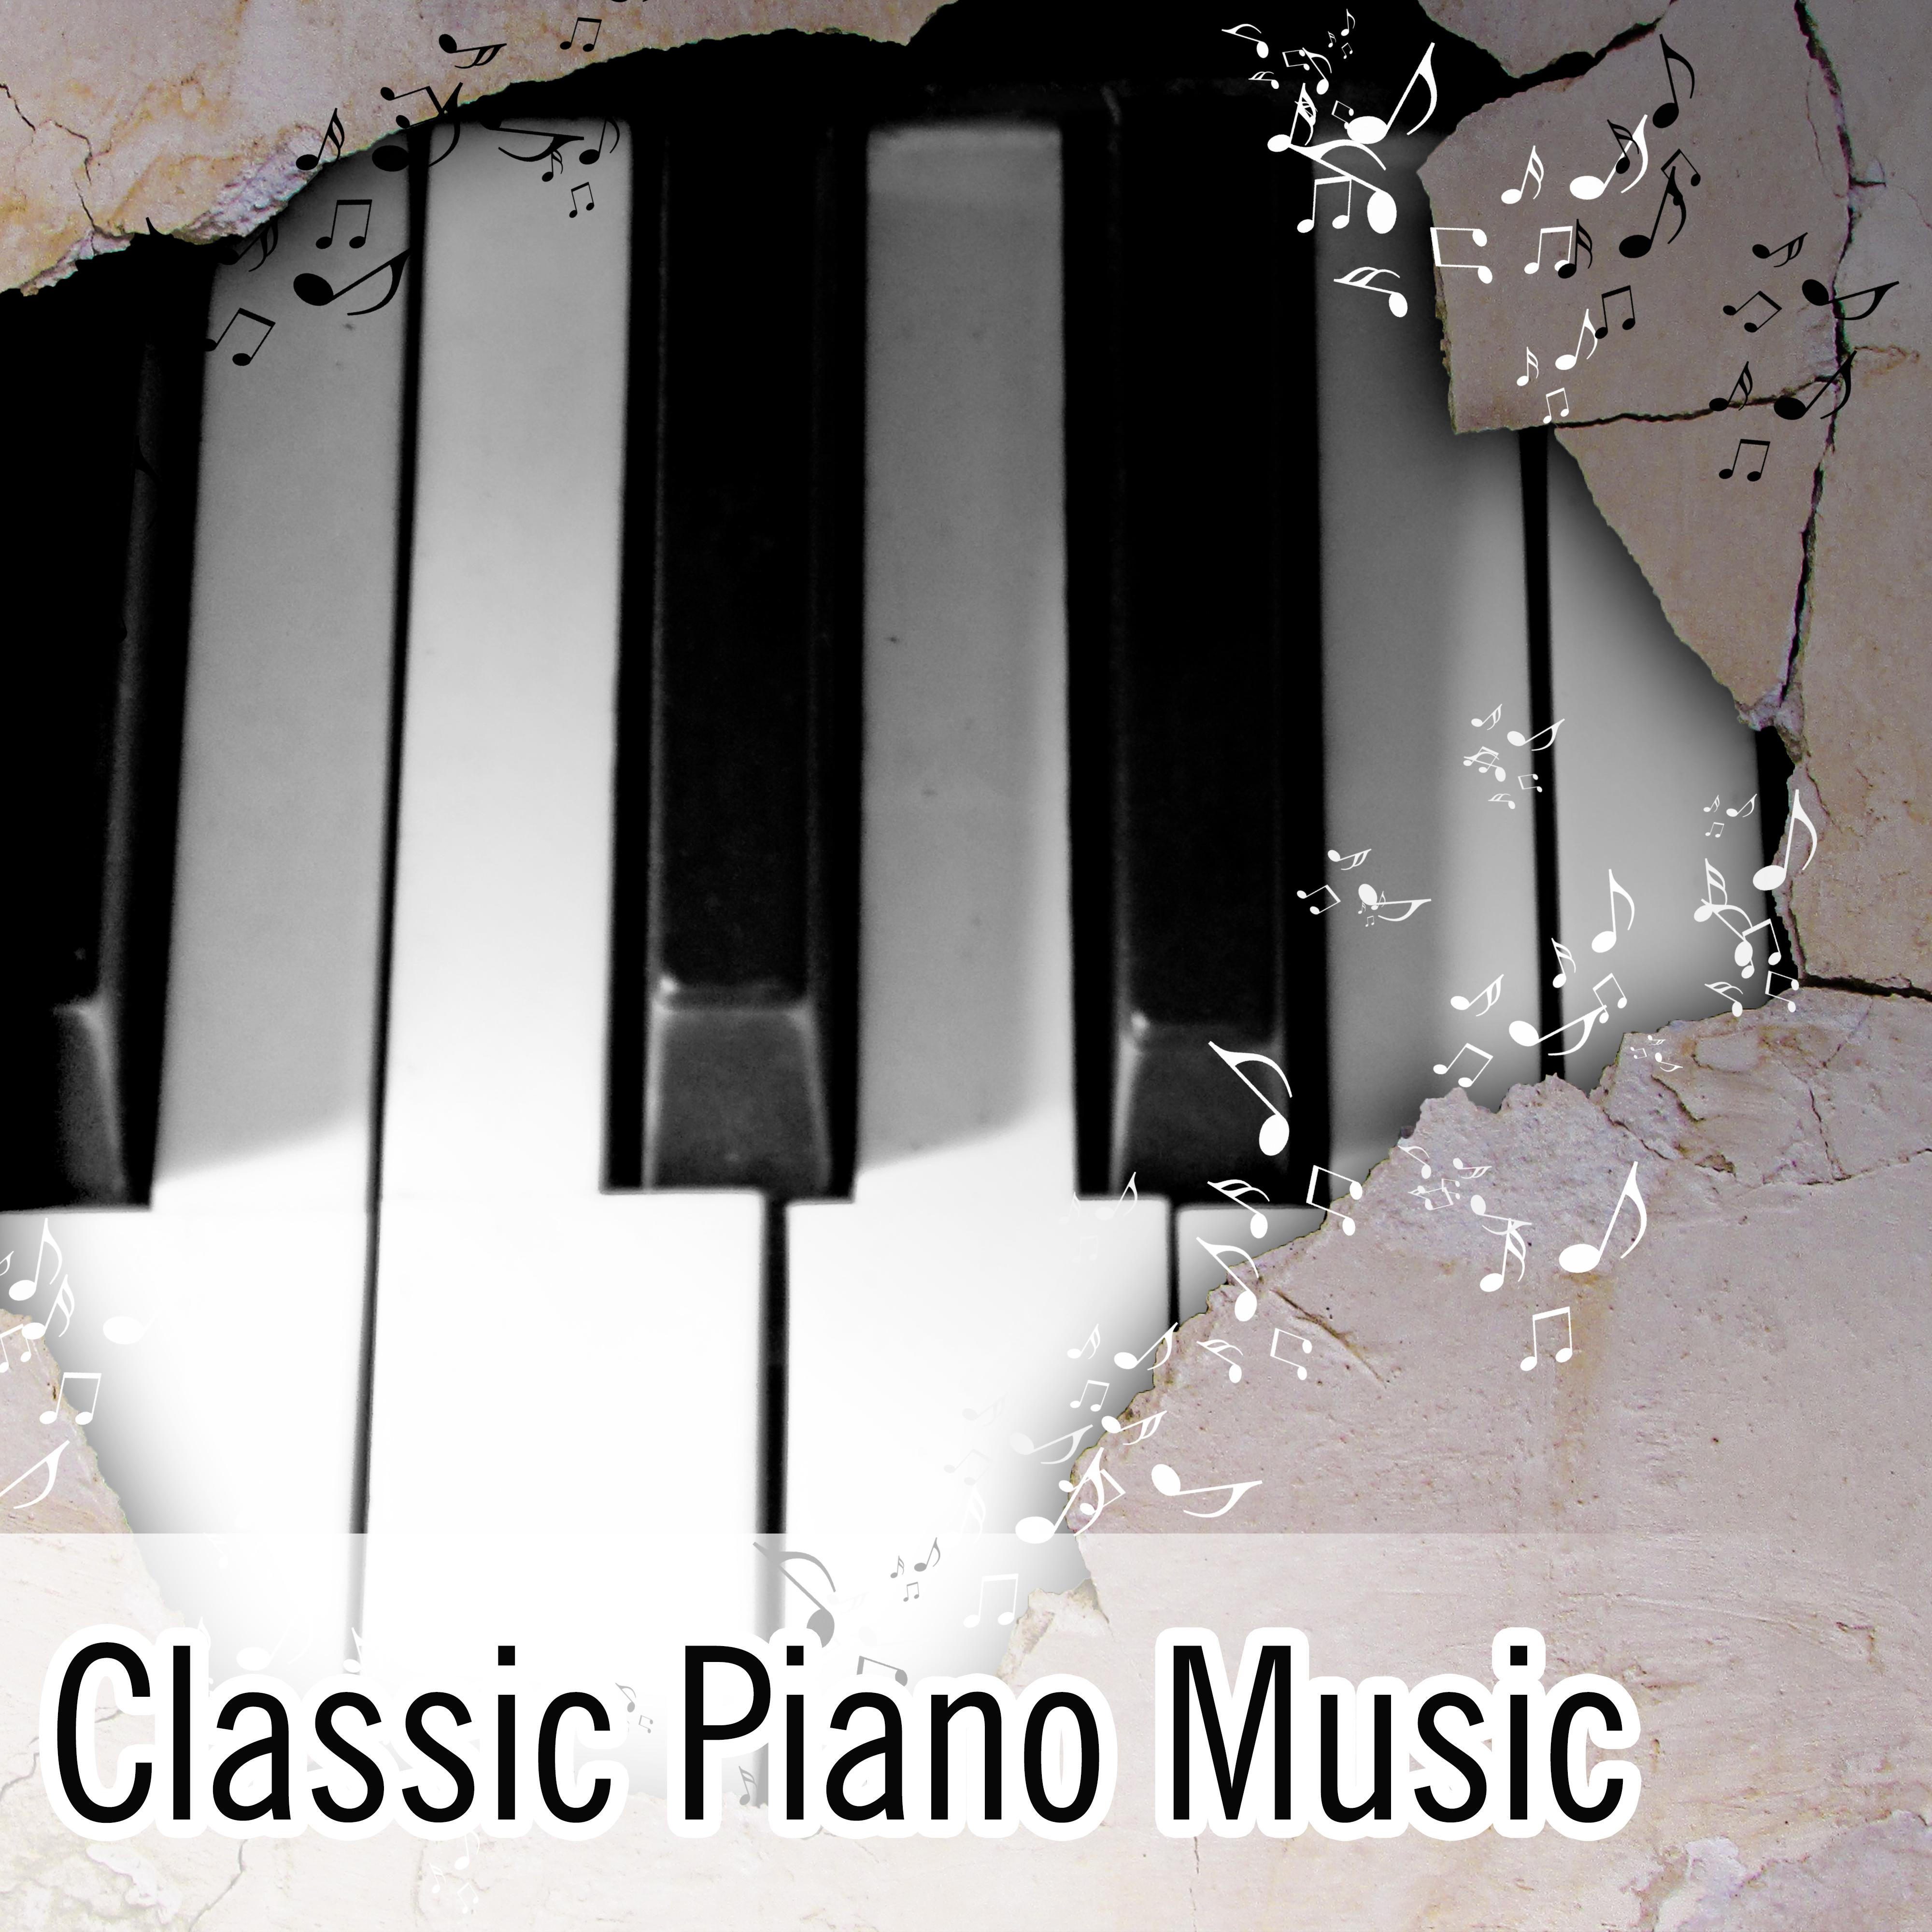 Classic Piano Music  Relaxing Piano Music, Rest After Work, Classic Music, Instrumental Piano, Easy Listening